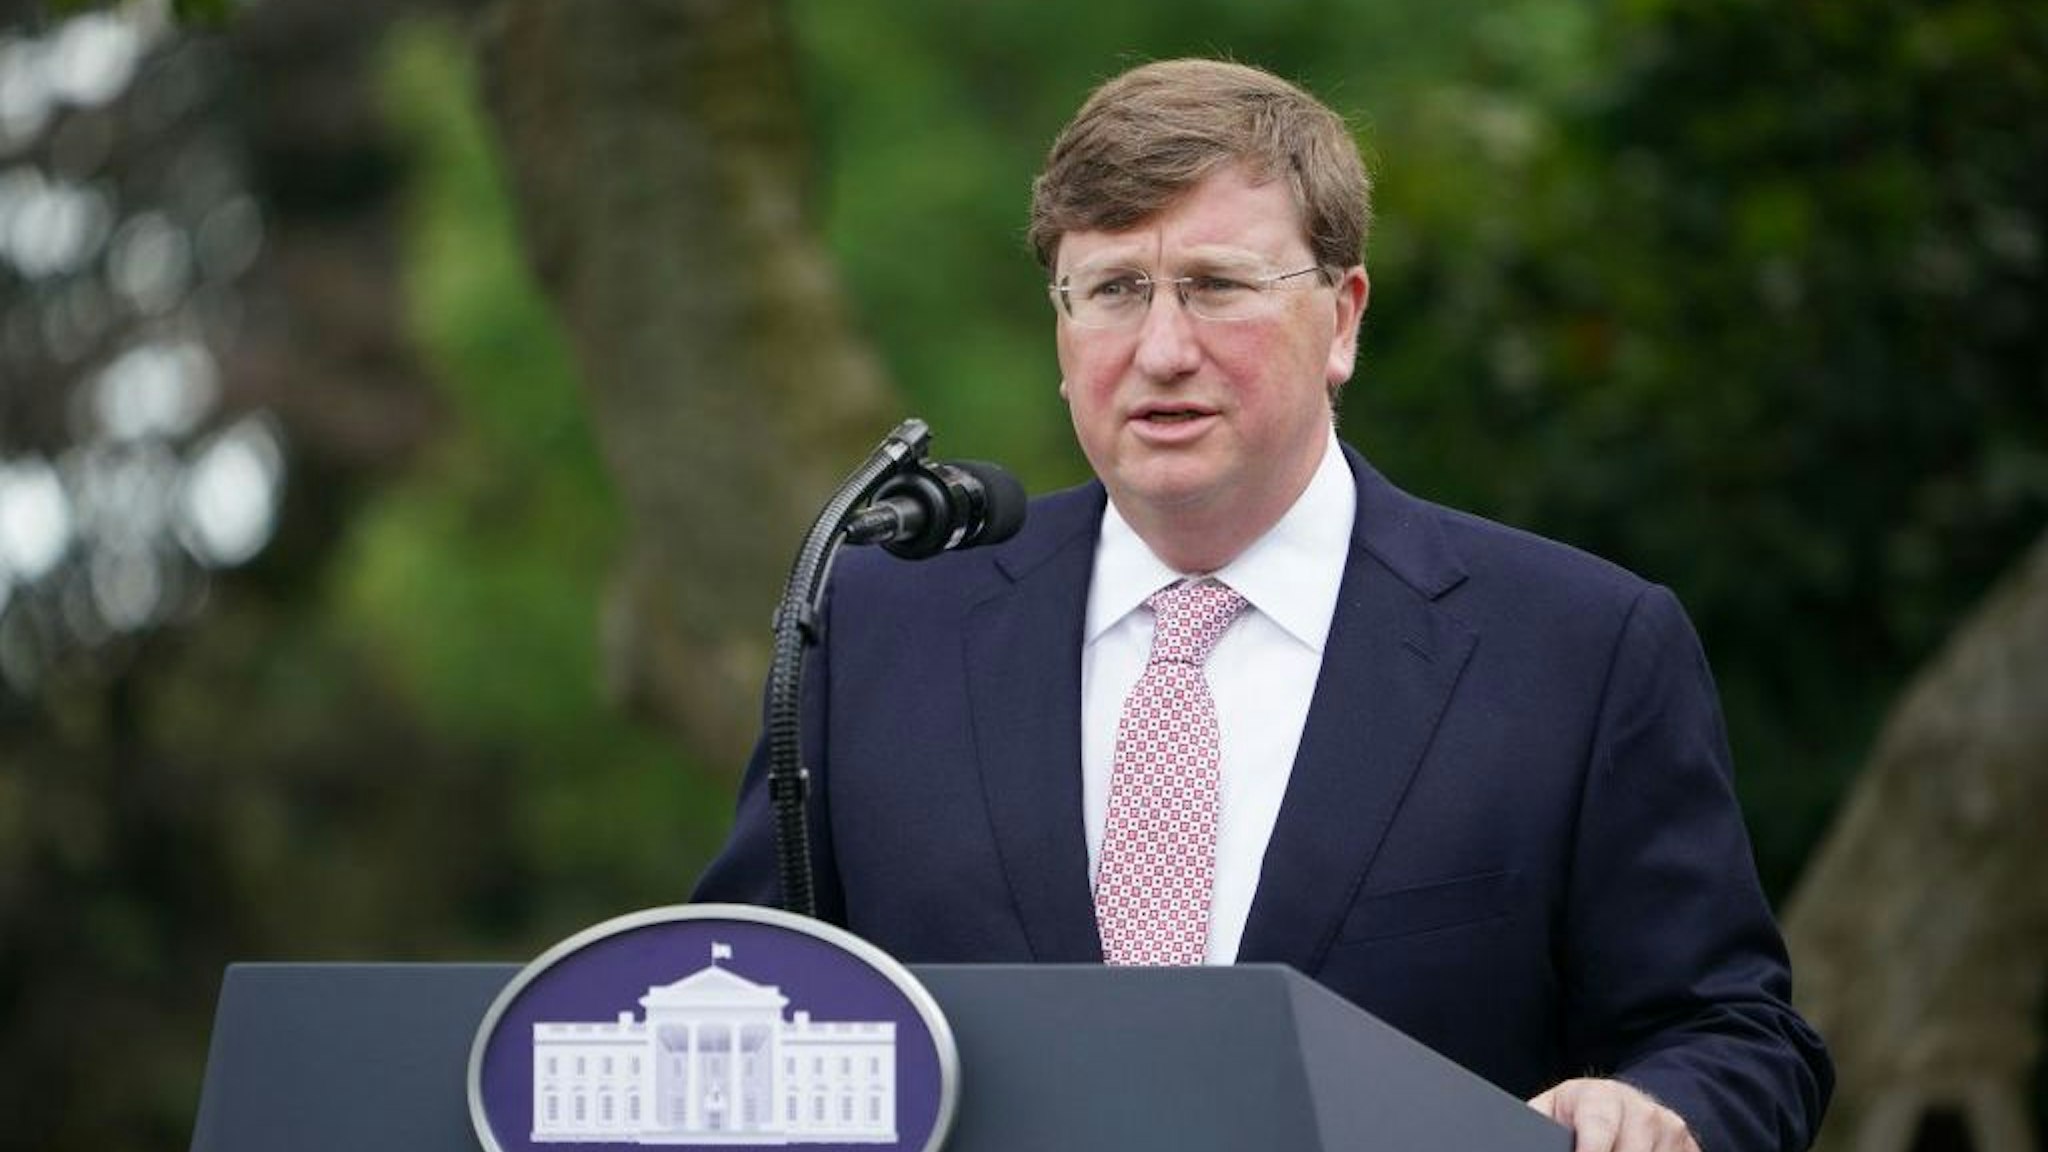 Mississippi Gov. Tate Reeves speaks on Covid-19 testing in the Rose Garden of the White House in Washington, DC on September 28, 2020. (Photo by MANDEL NGAN / AFP) (Photo by MANDEL NGAN/AFP via Getty Images)